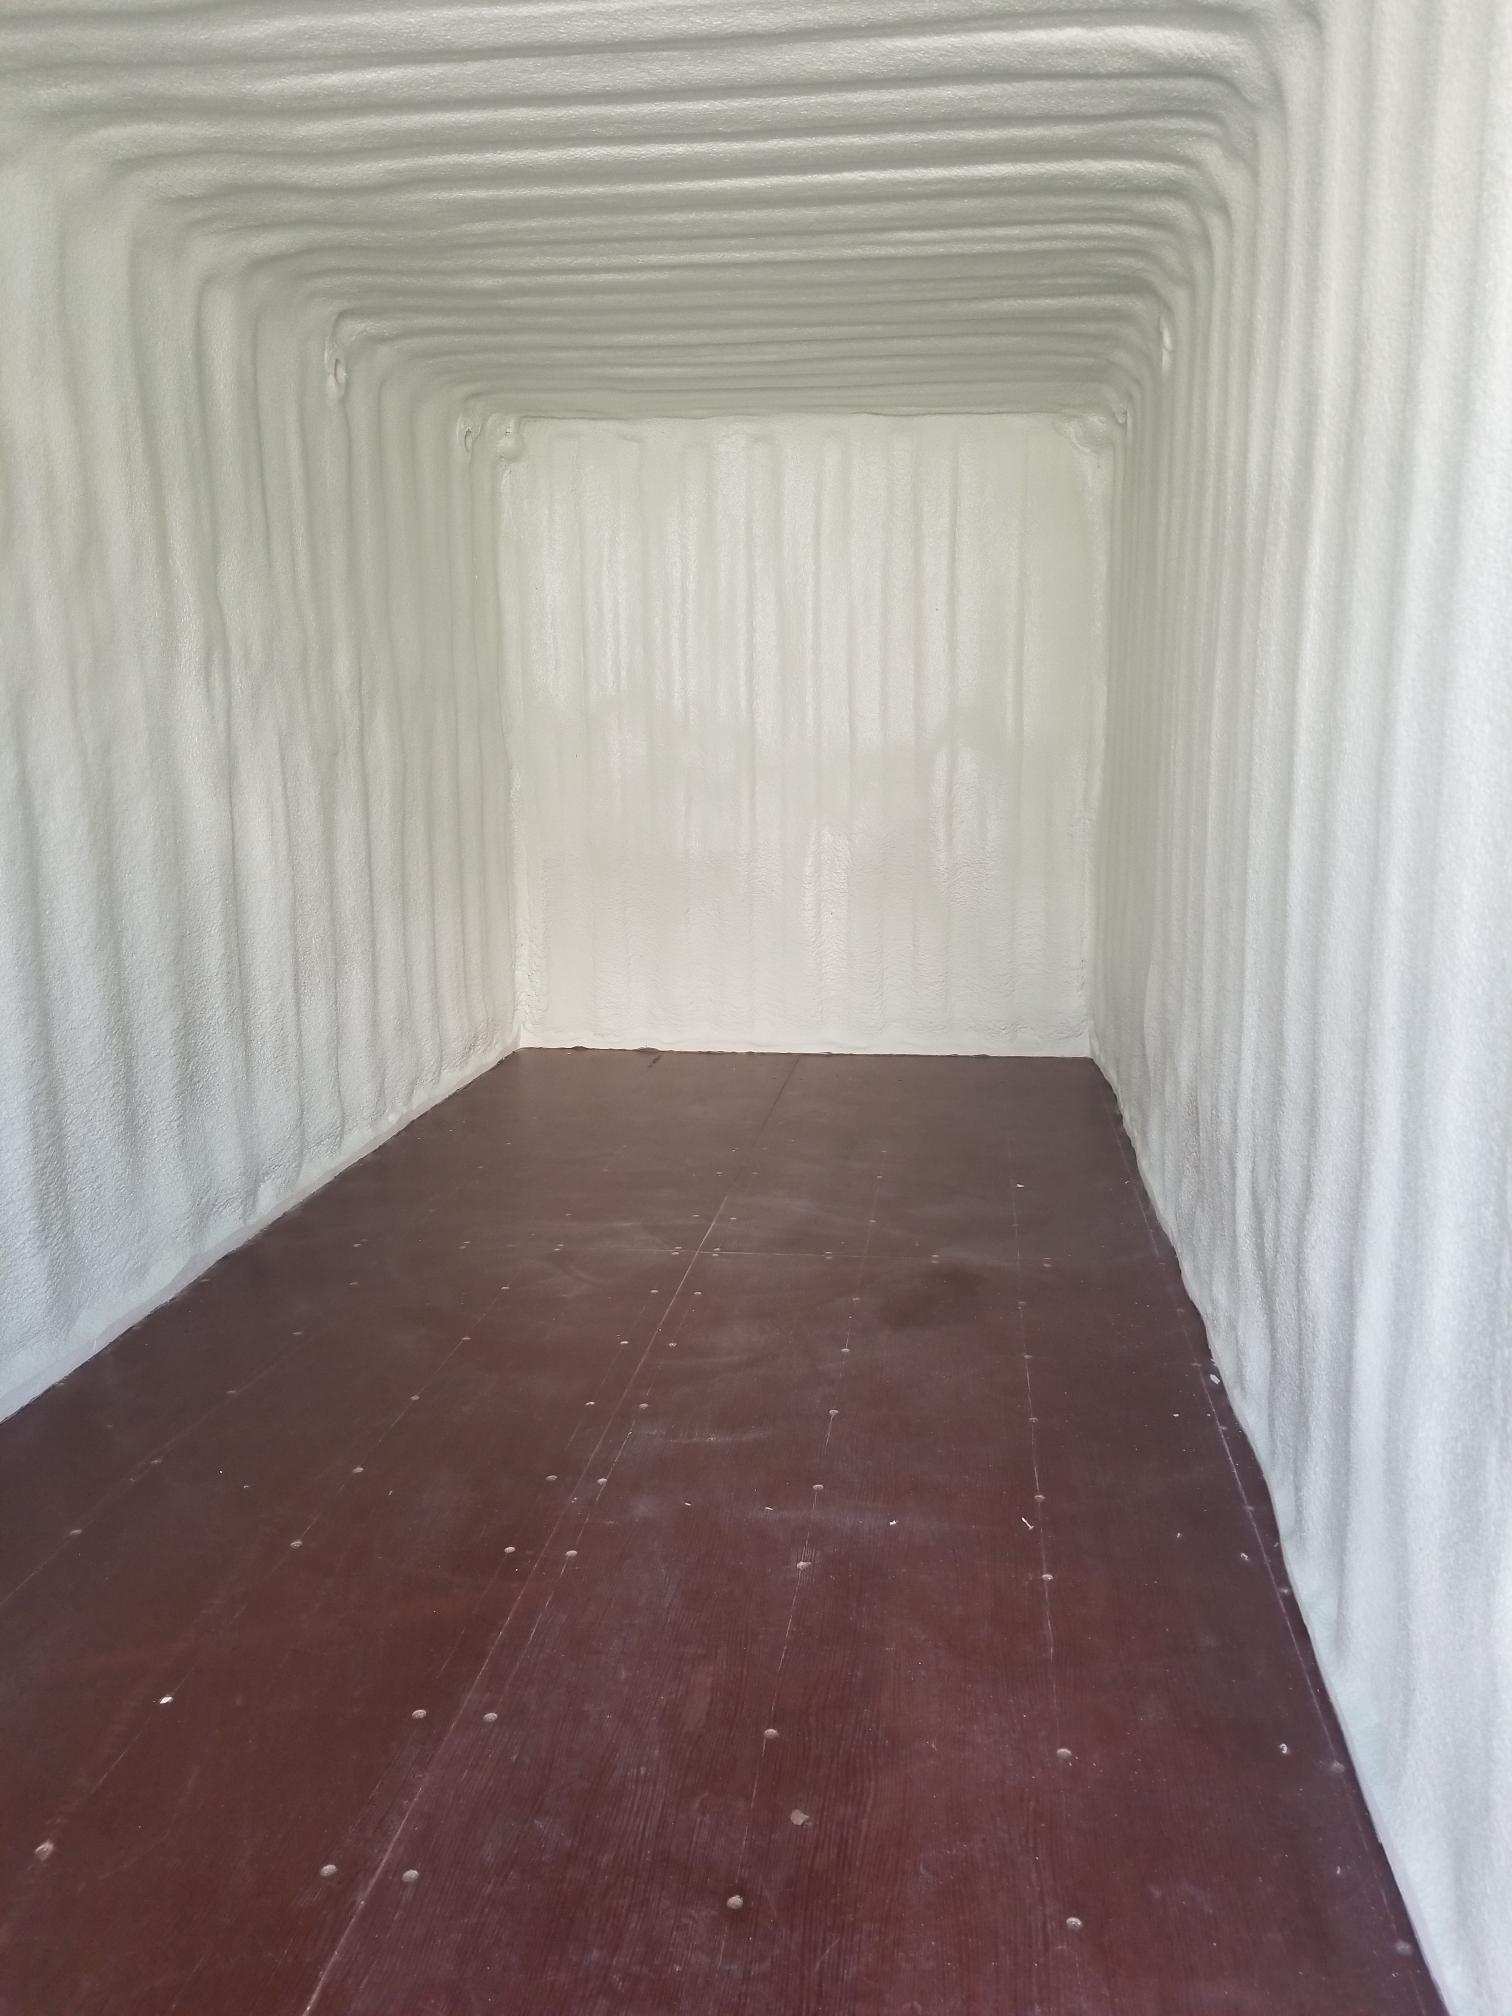 A white container with a floor in it